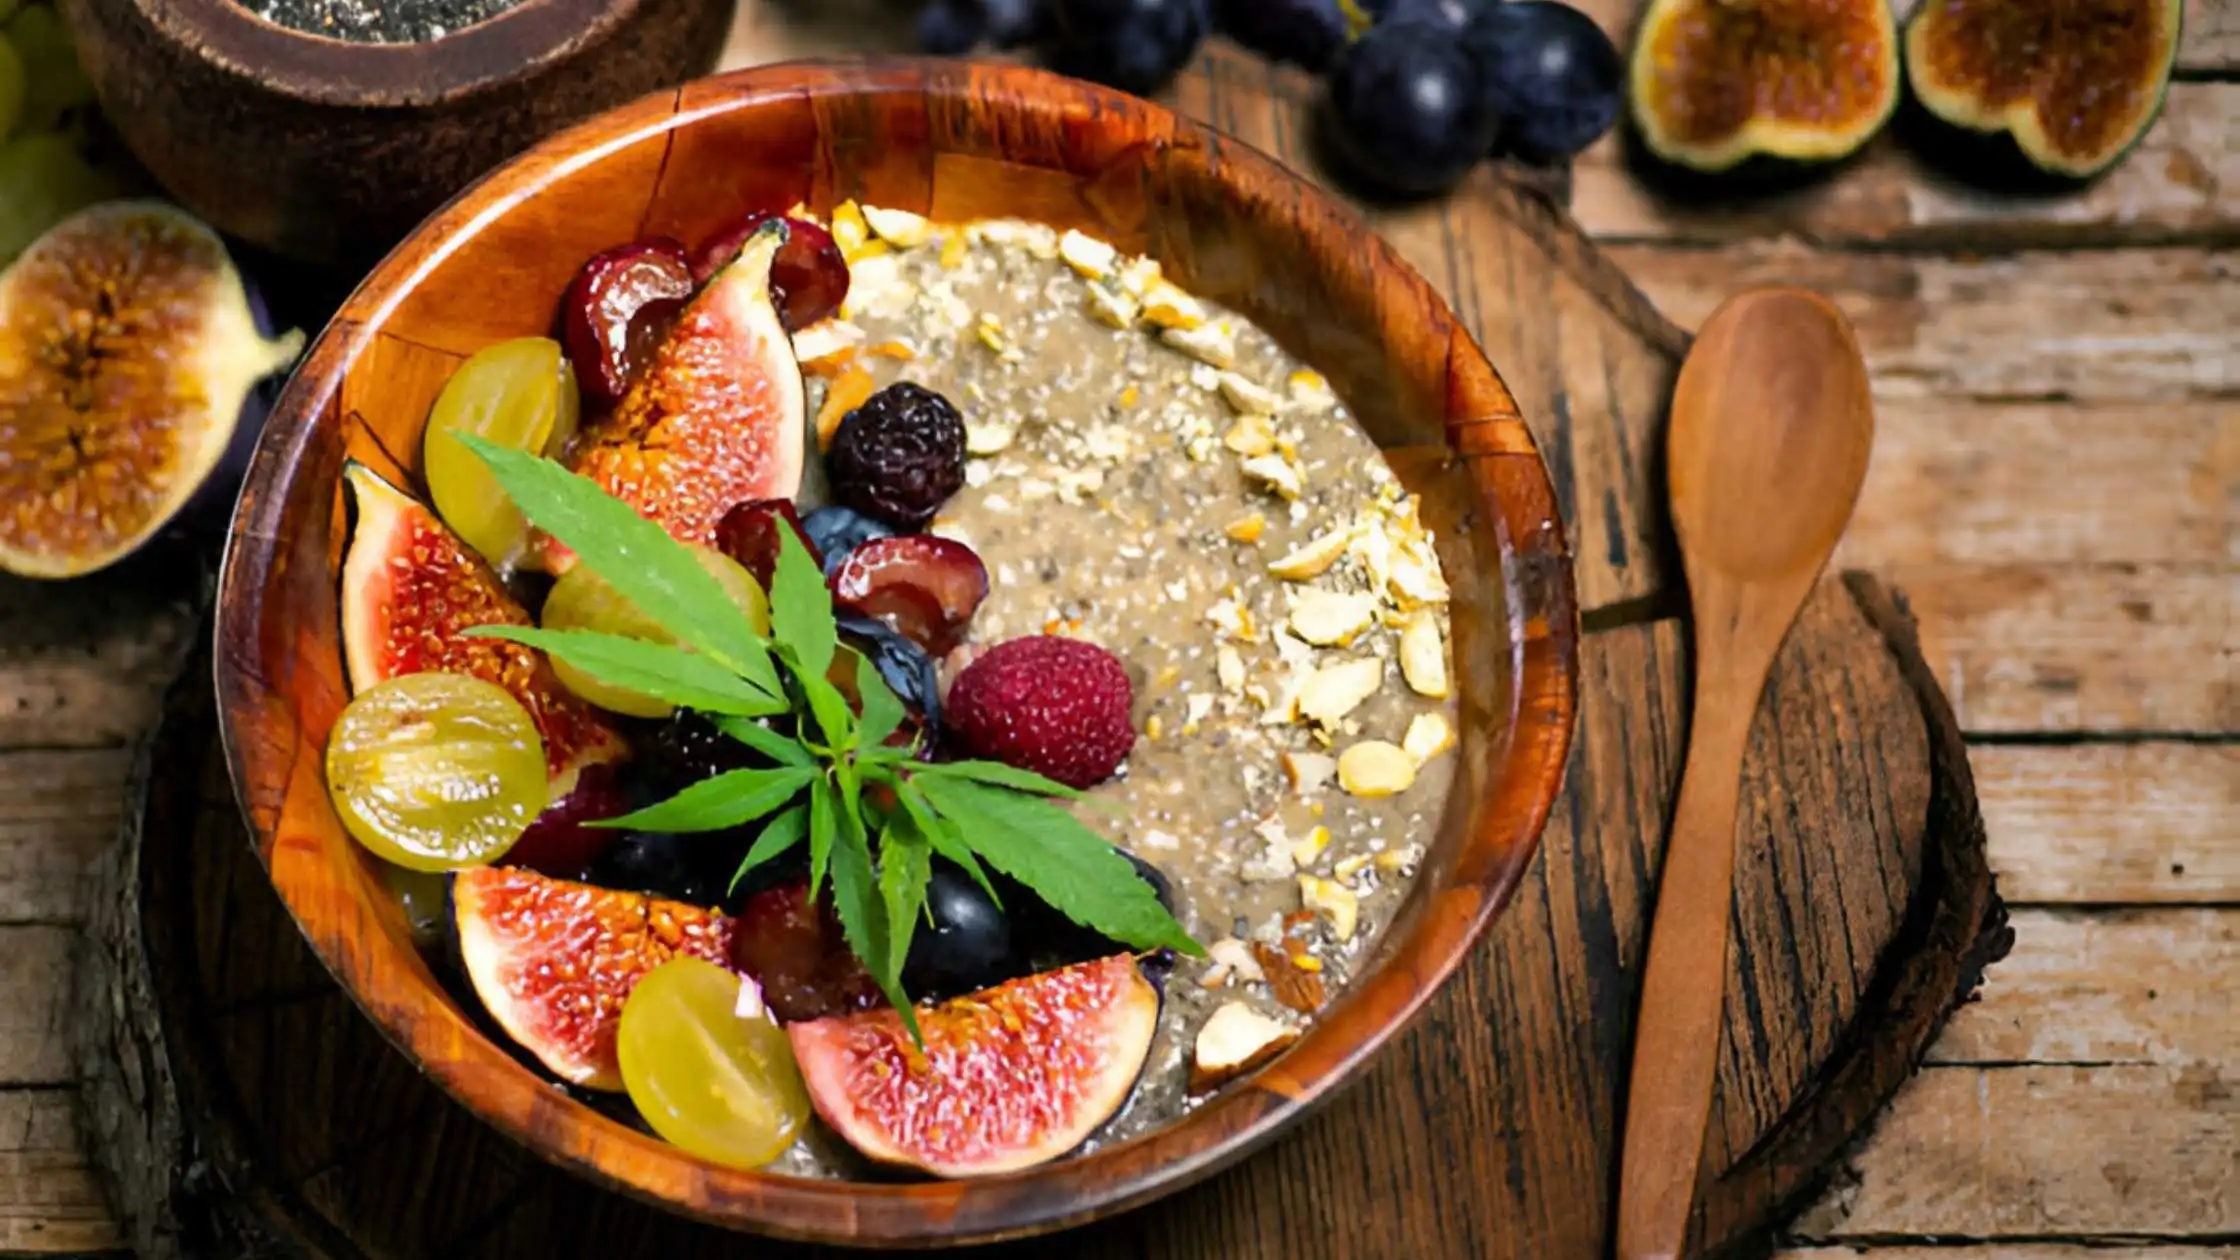 Reform Your Diet Plans With this Hemp Nutrition